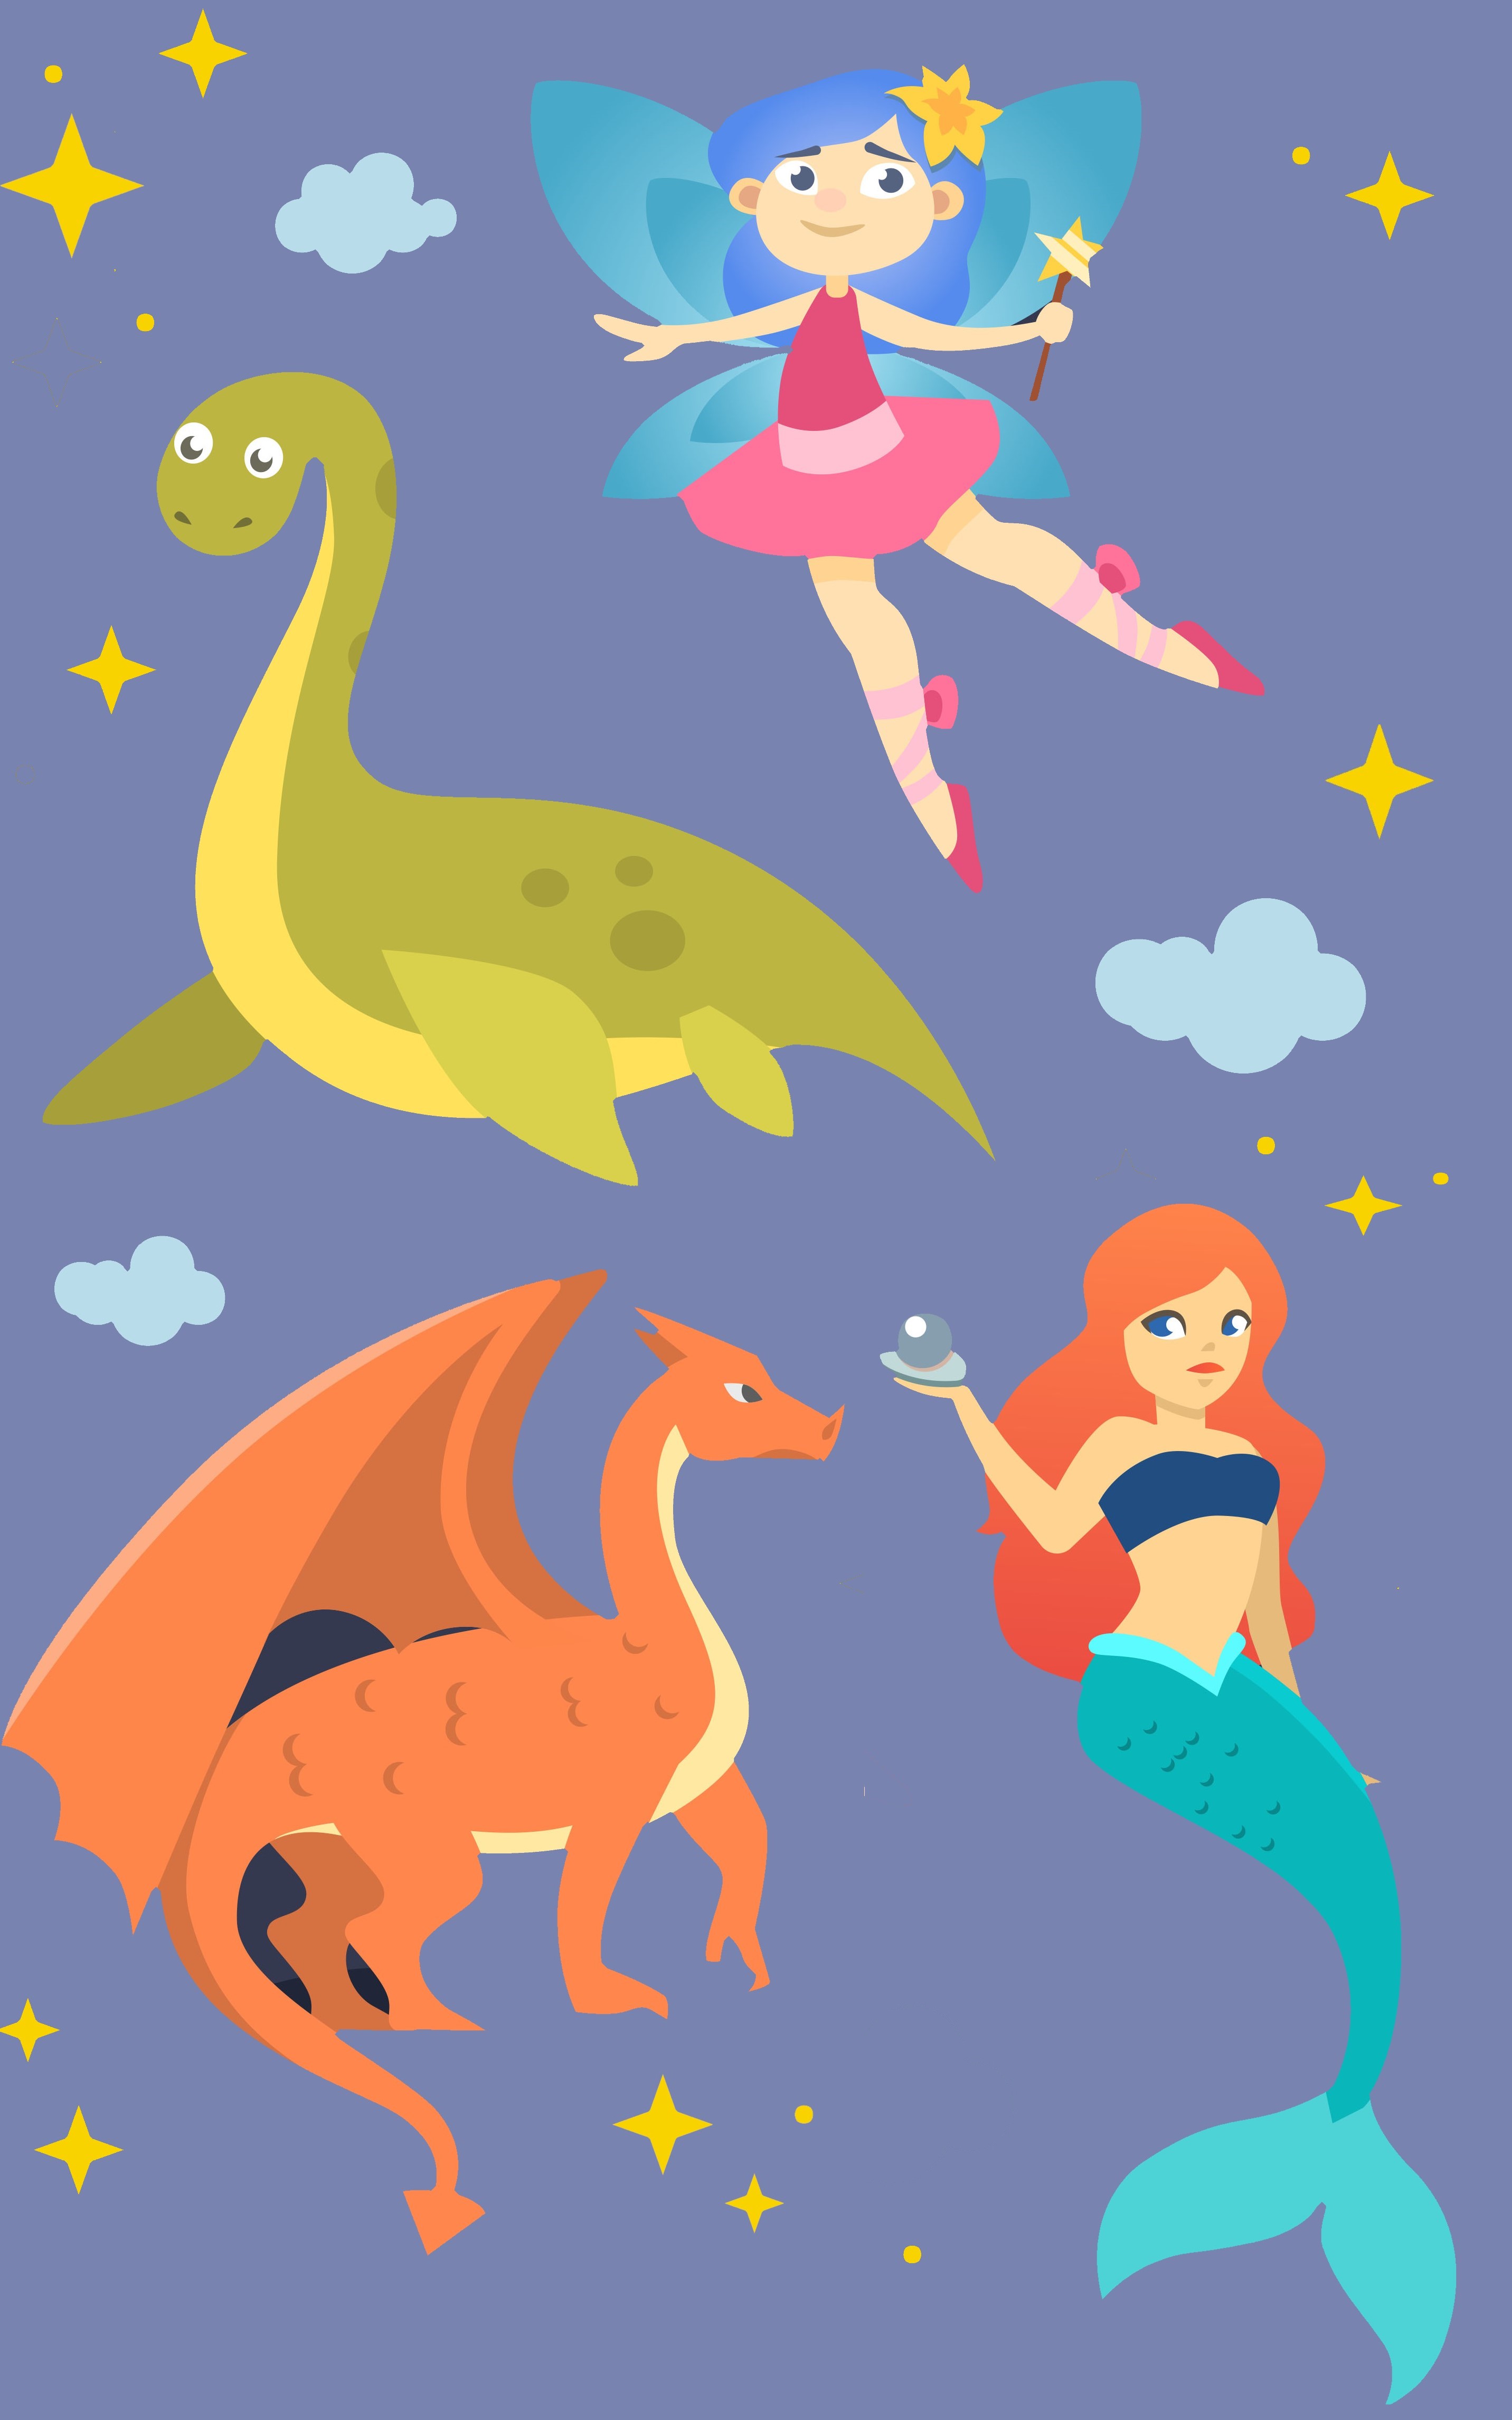 Mermaid, dragon, fairy, and loch ness monster